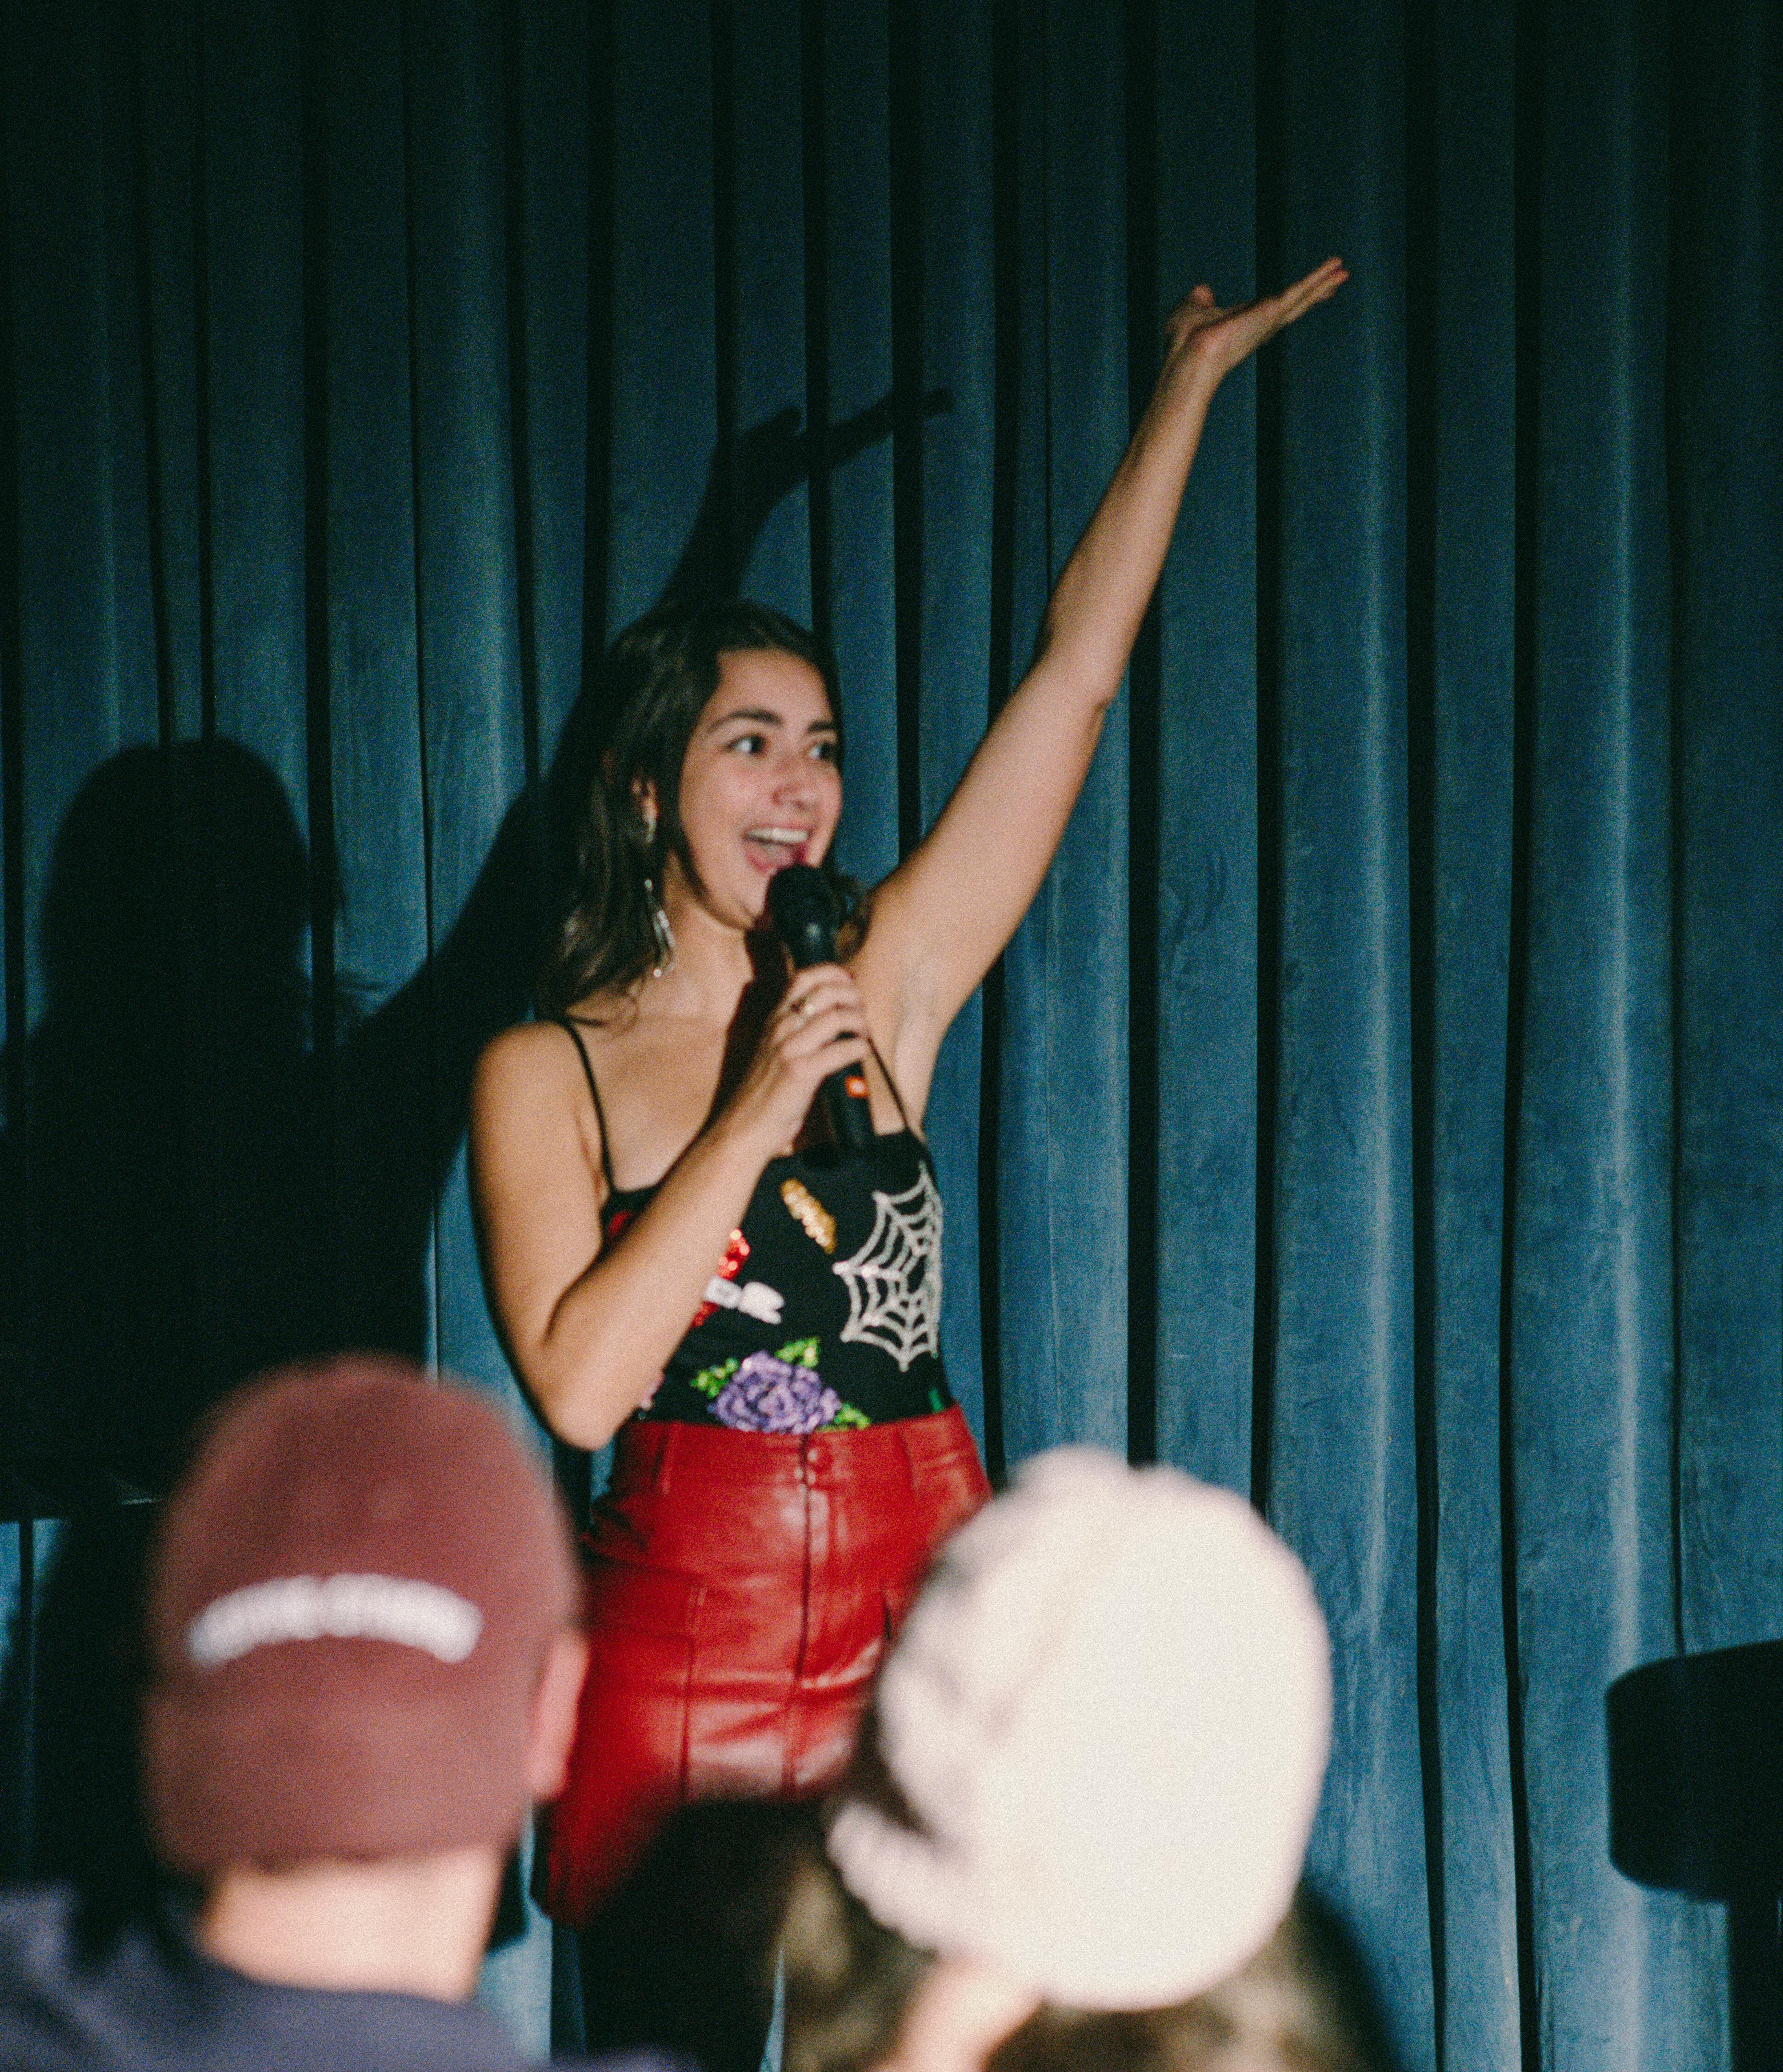 A woman stands on stage holding a microphone, raising one arm, and speaking to an audience in front of blue curtains.